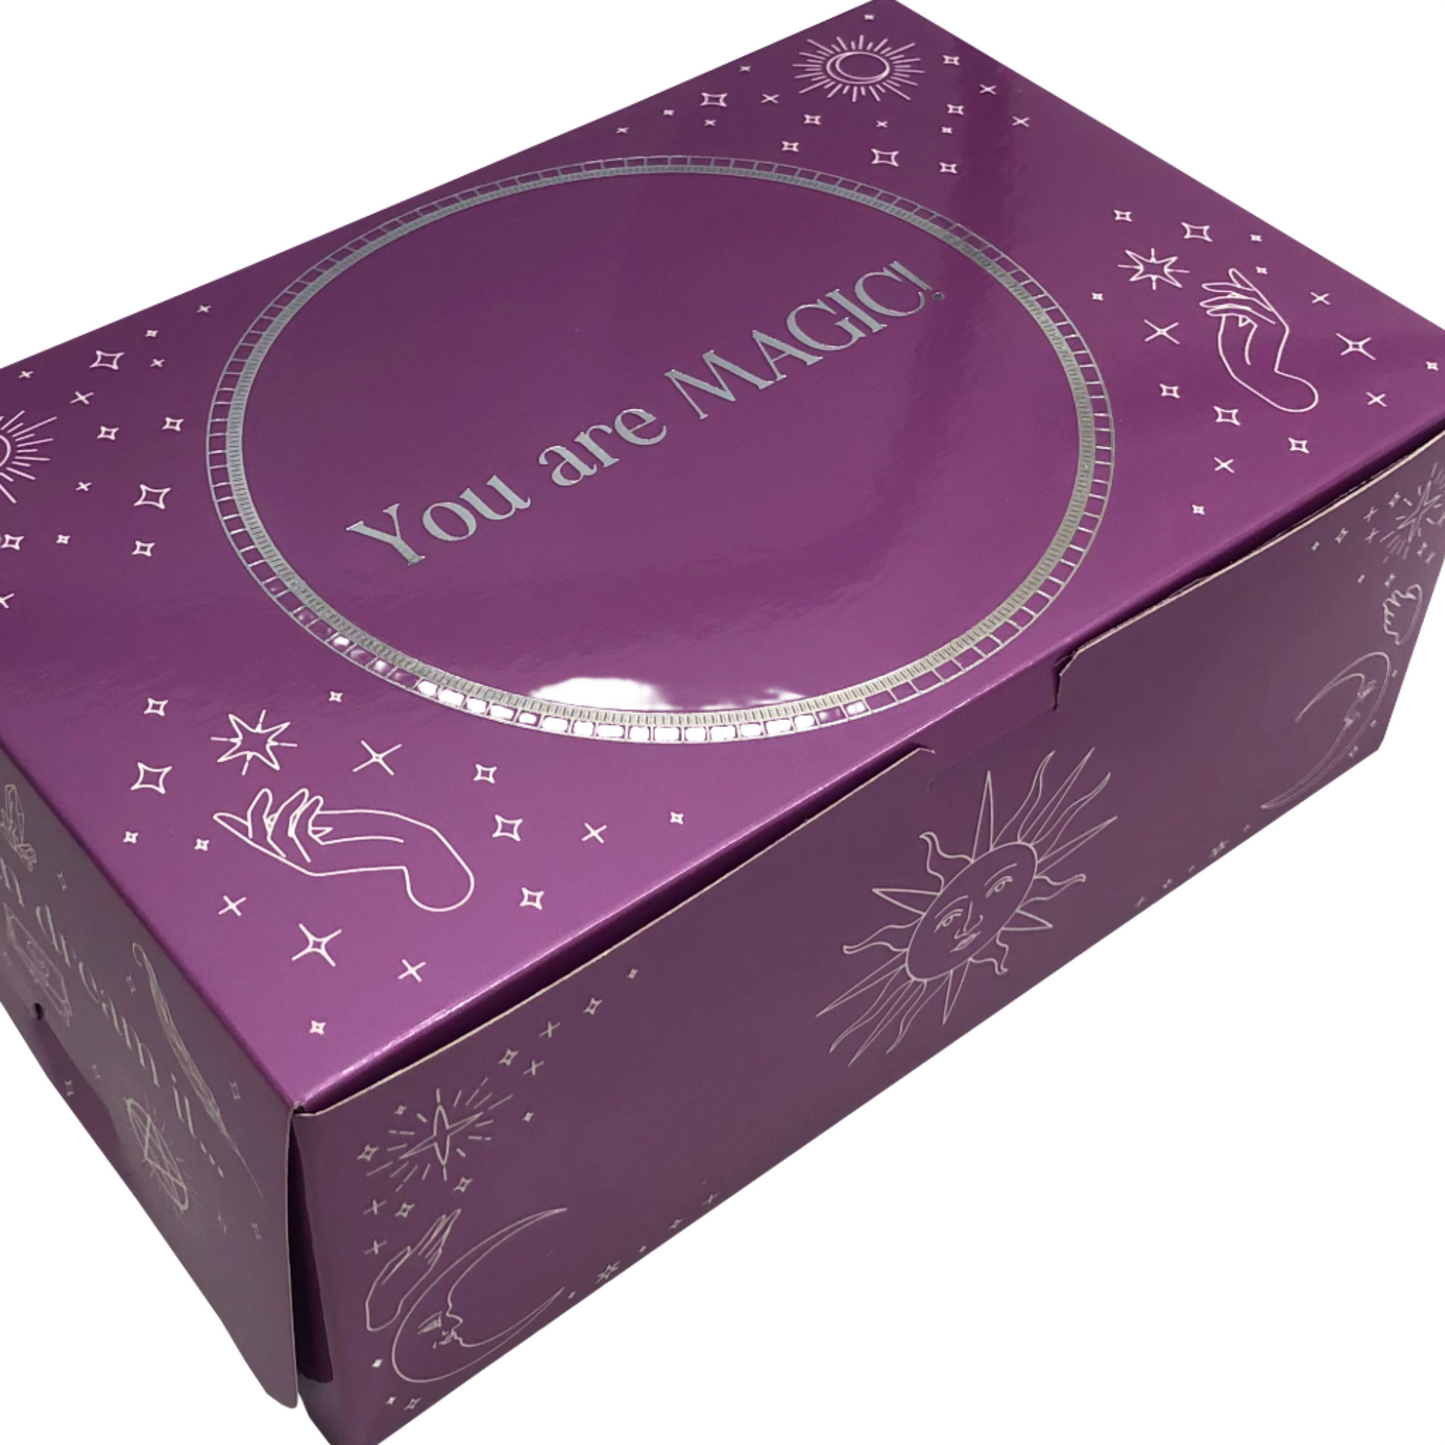 You Are Magic! Box - 25 pack